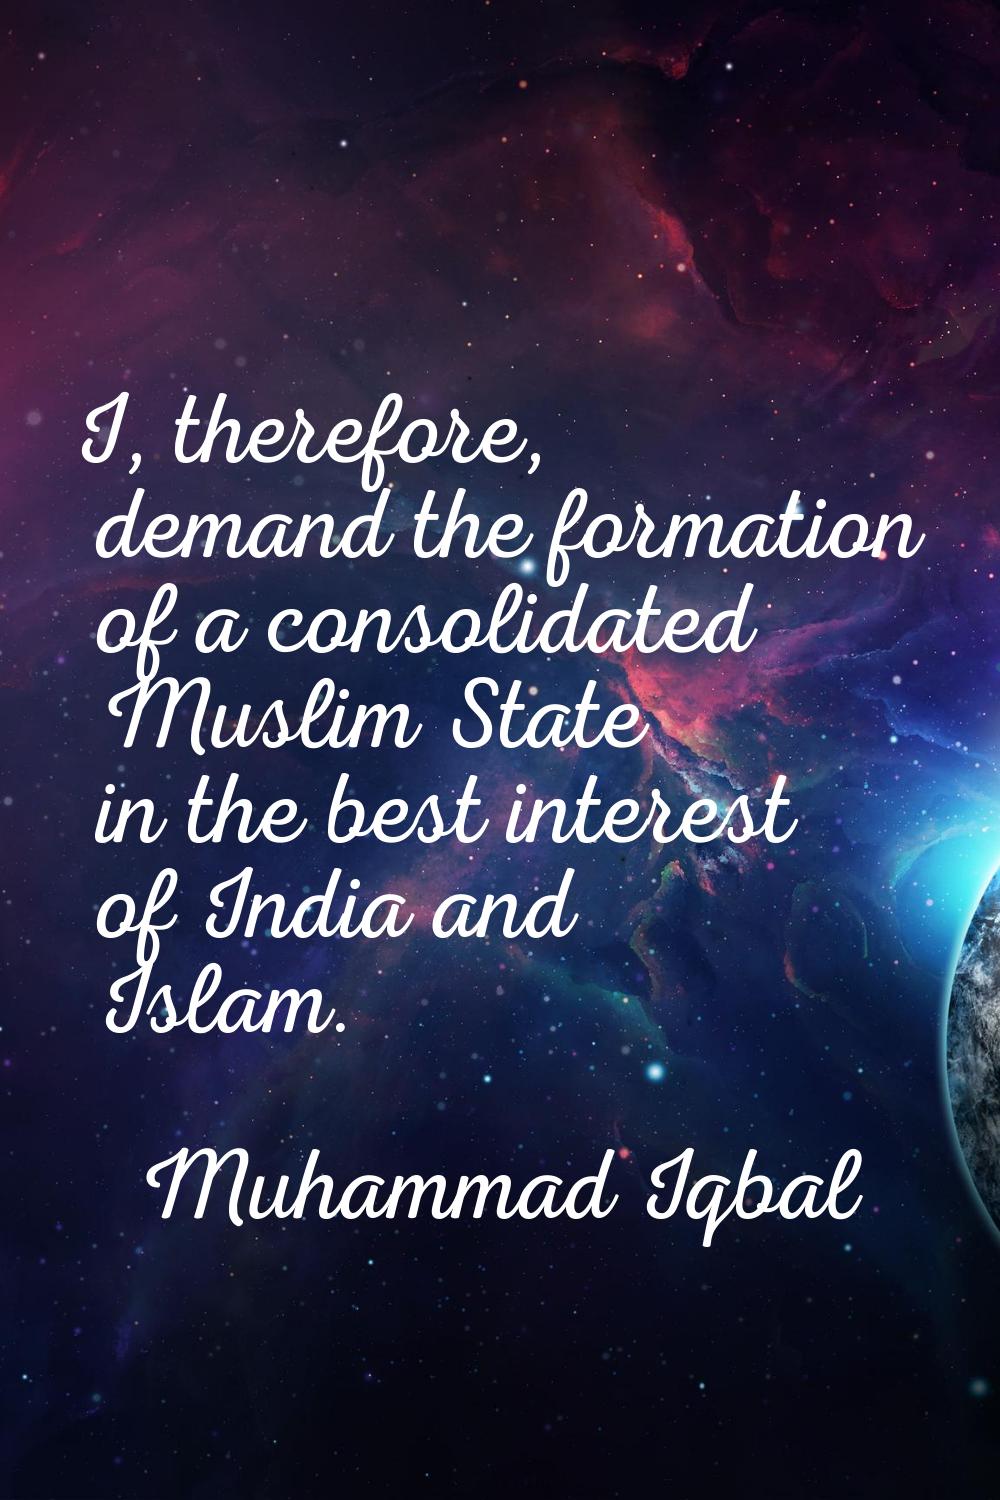 I, therefore, demand the formation of a consolidated Muslim State in the best interest of India and